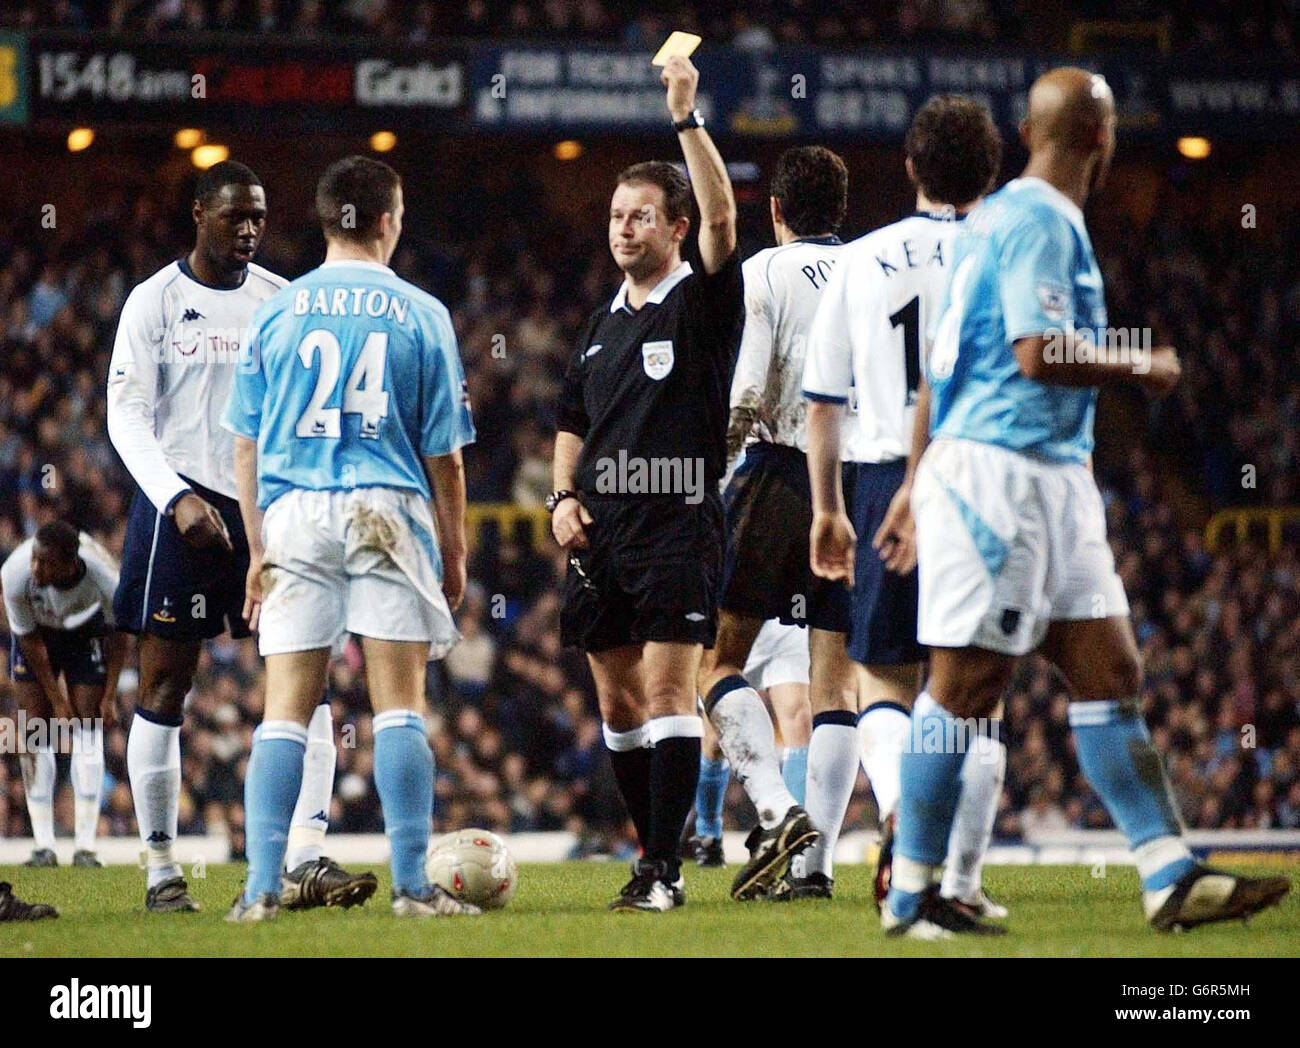 City's Joey Barton (second left) is yellow carded by referee Rob Styles (centre) during the FA Cup fourth round replay match against Tottenham Hotspur at White Lane, London. Manchester